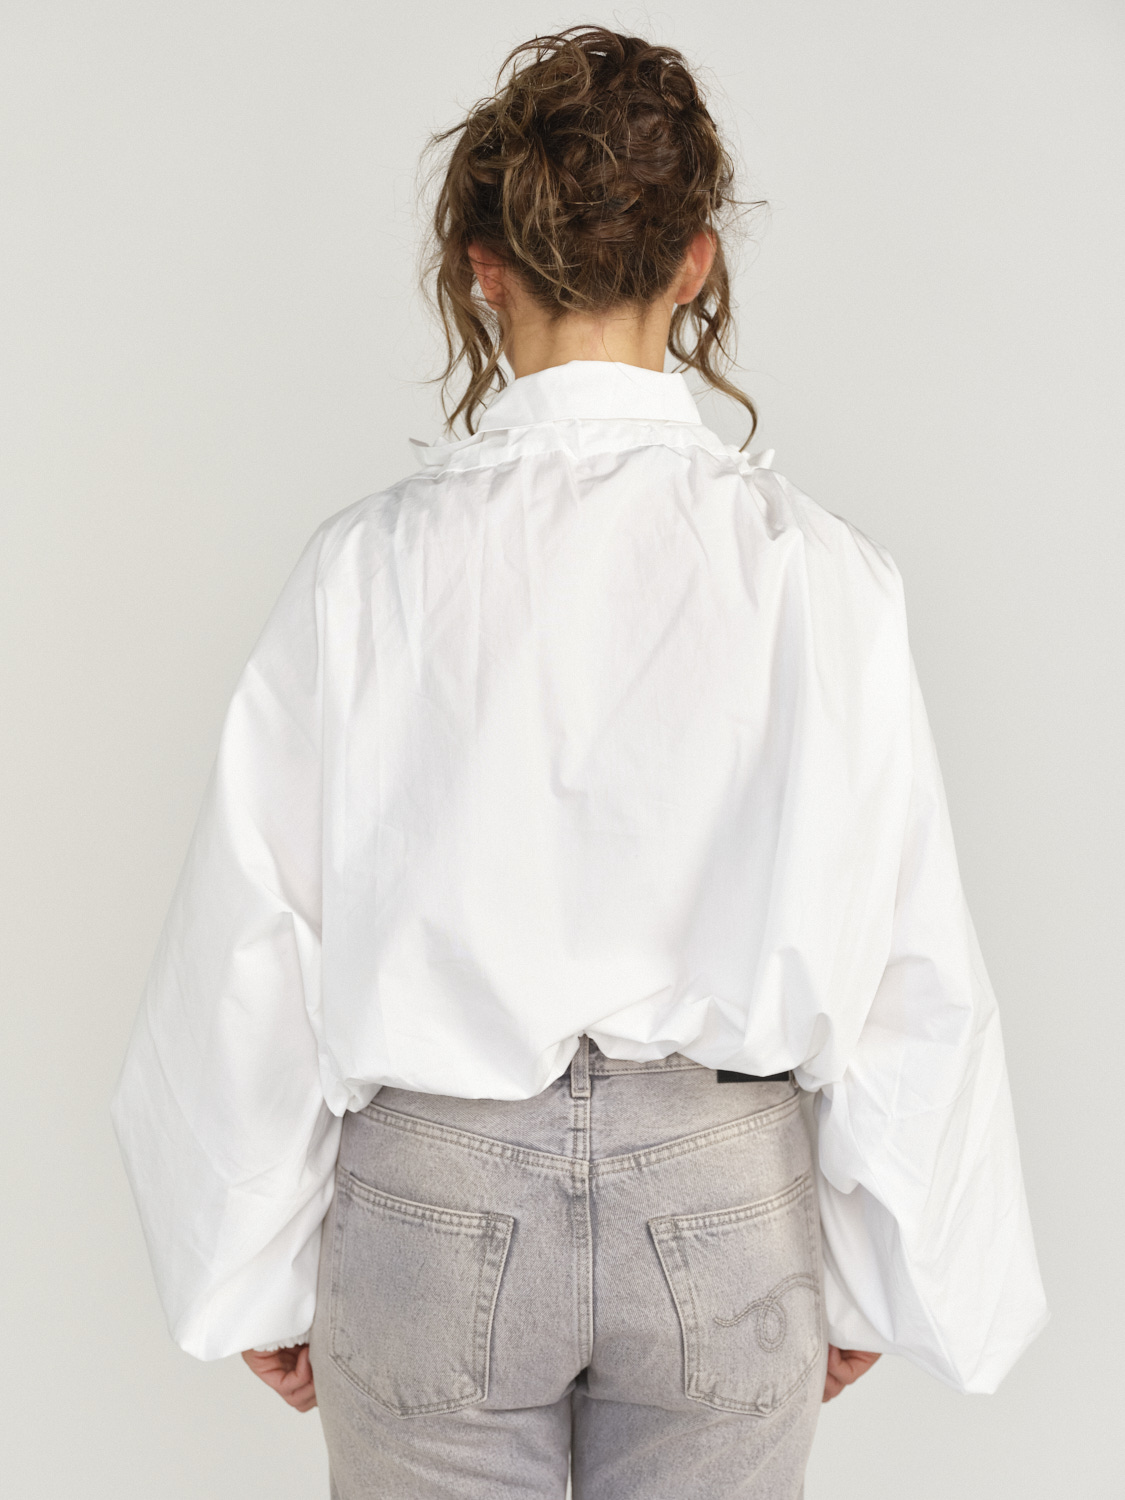 Patou Gros Grain - Oversized blouse with ruffle collar white S/M